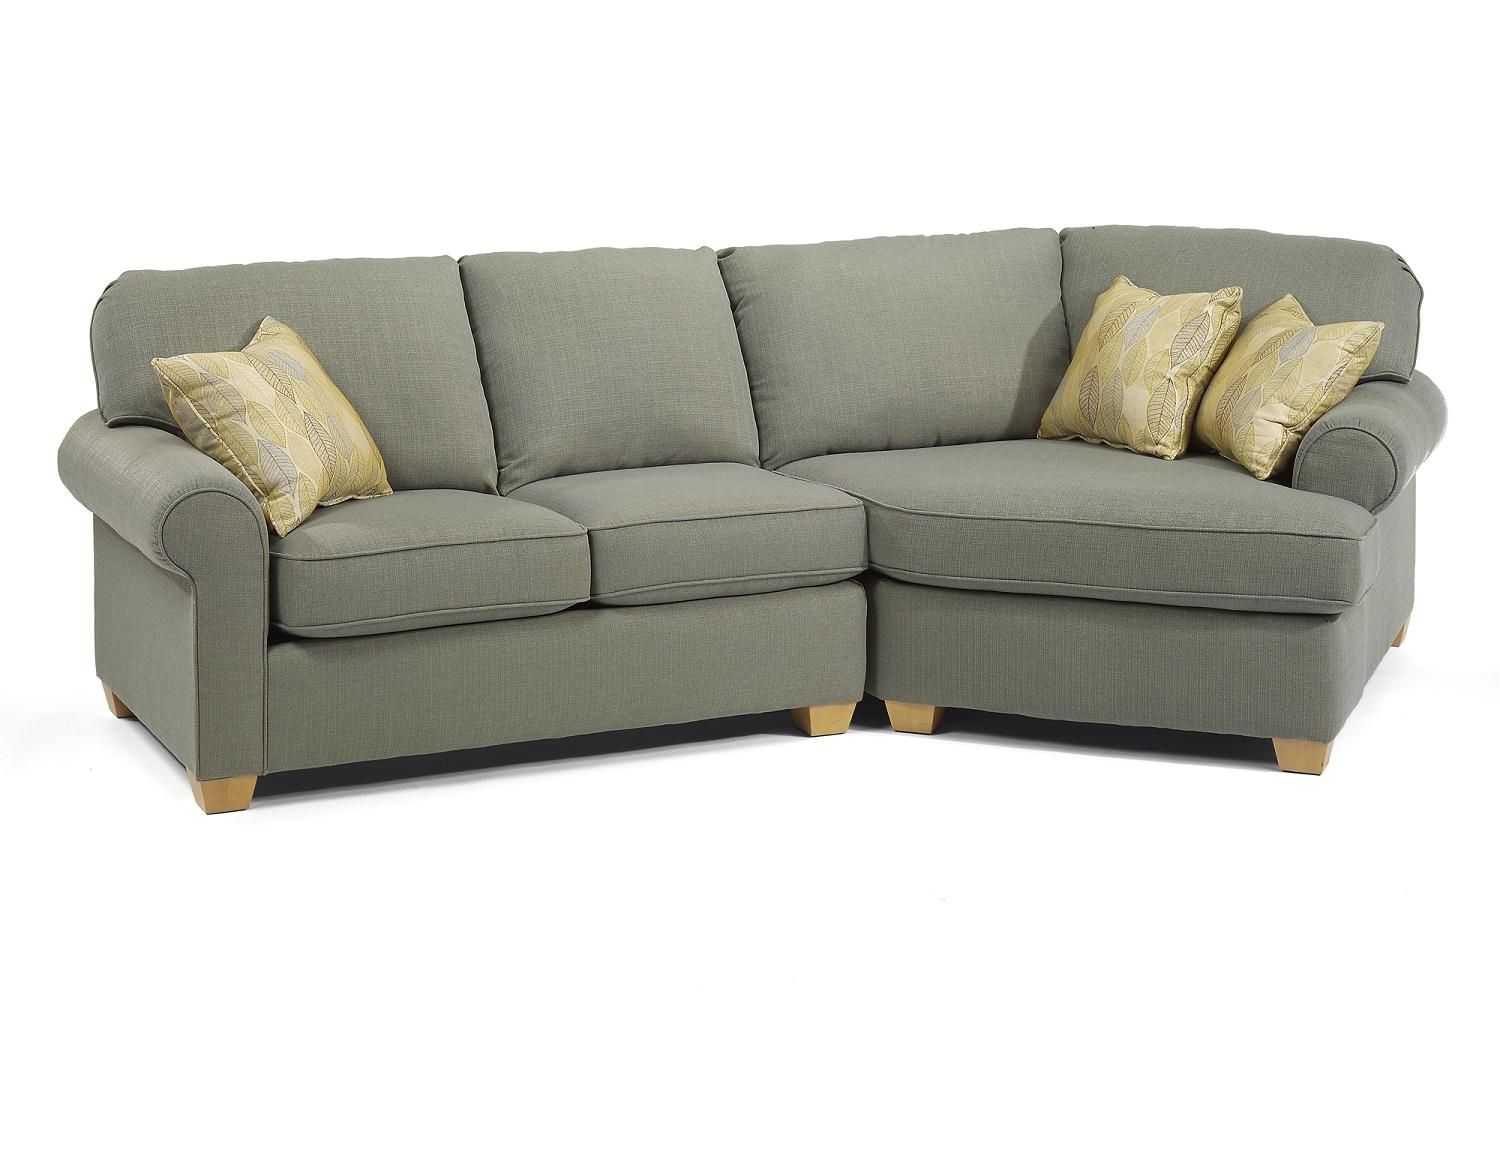 Angled Chaise Sofa – Plymouth Furniture Pertaining To Angled Chaise Sofas (View 1 of 10)